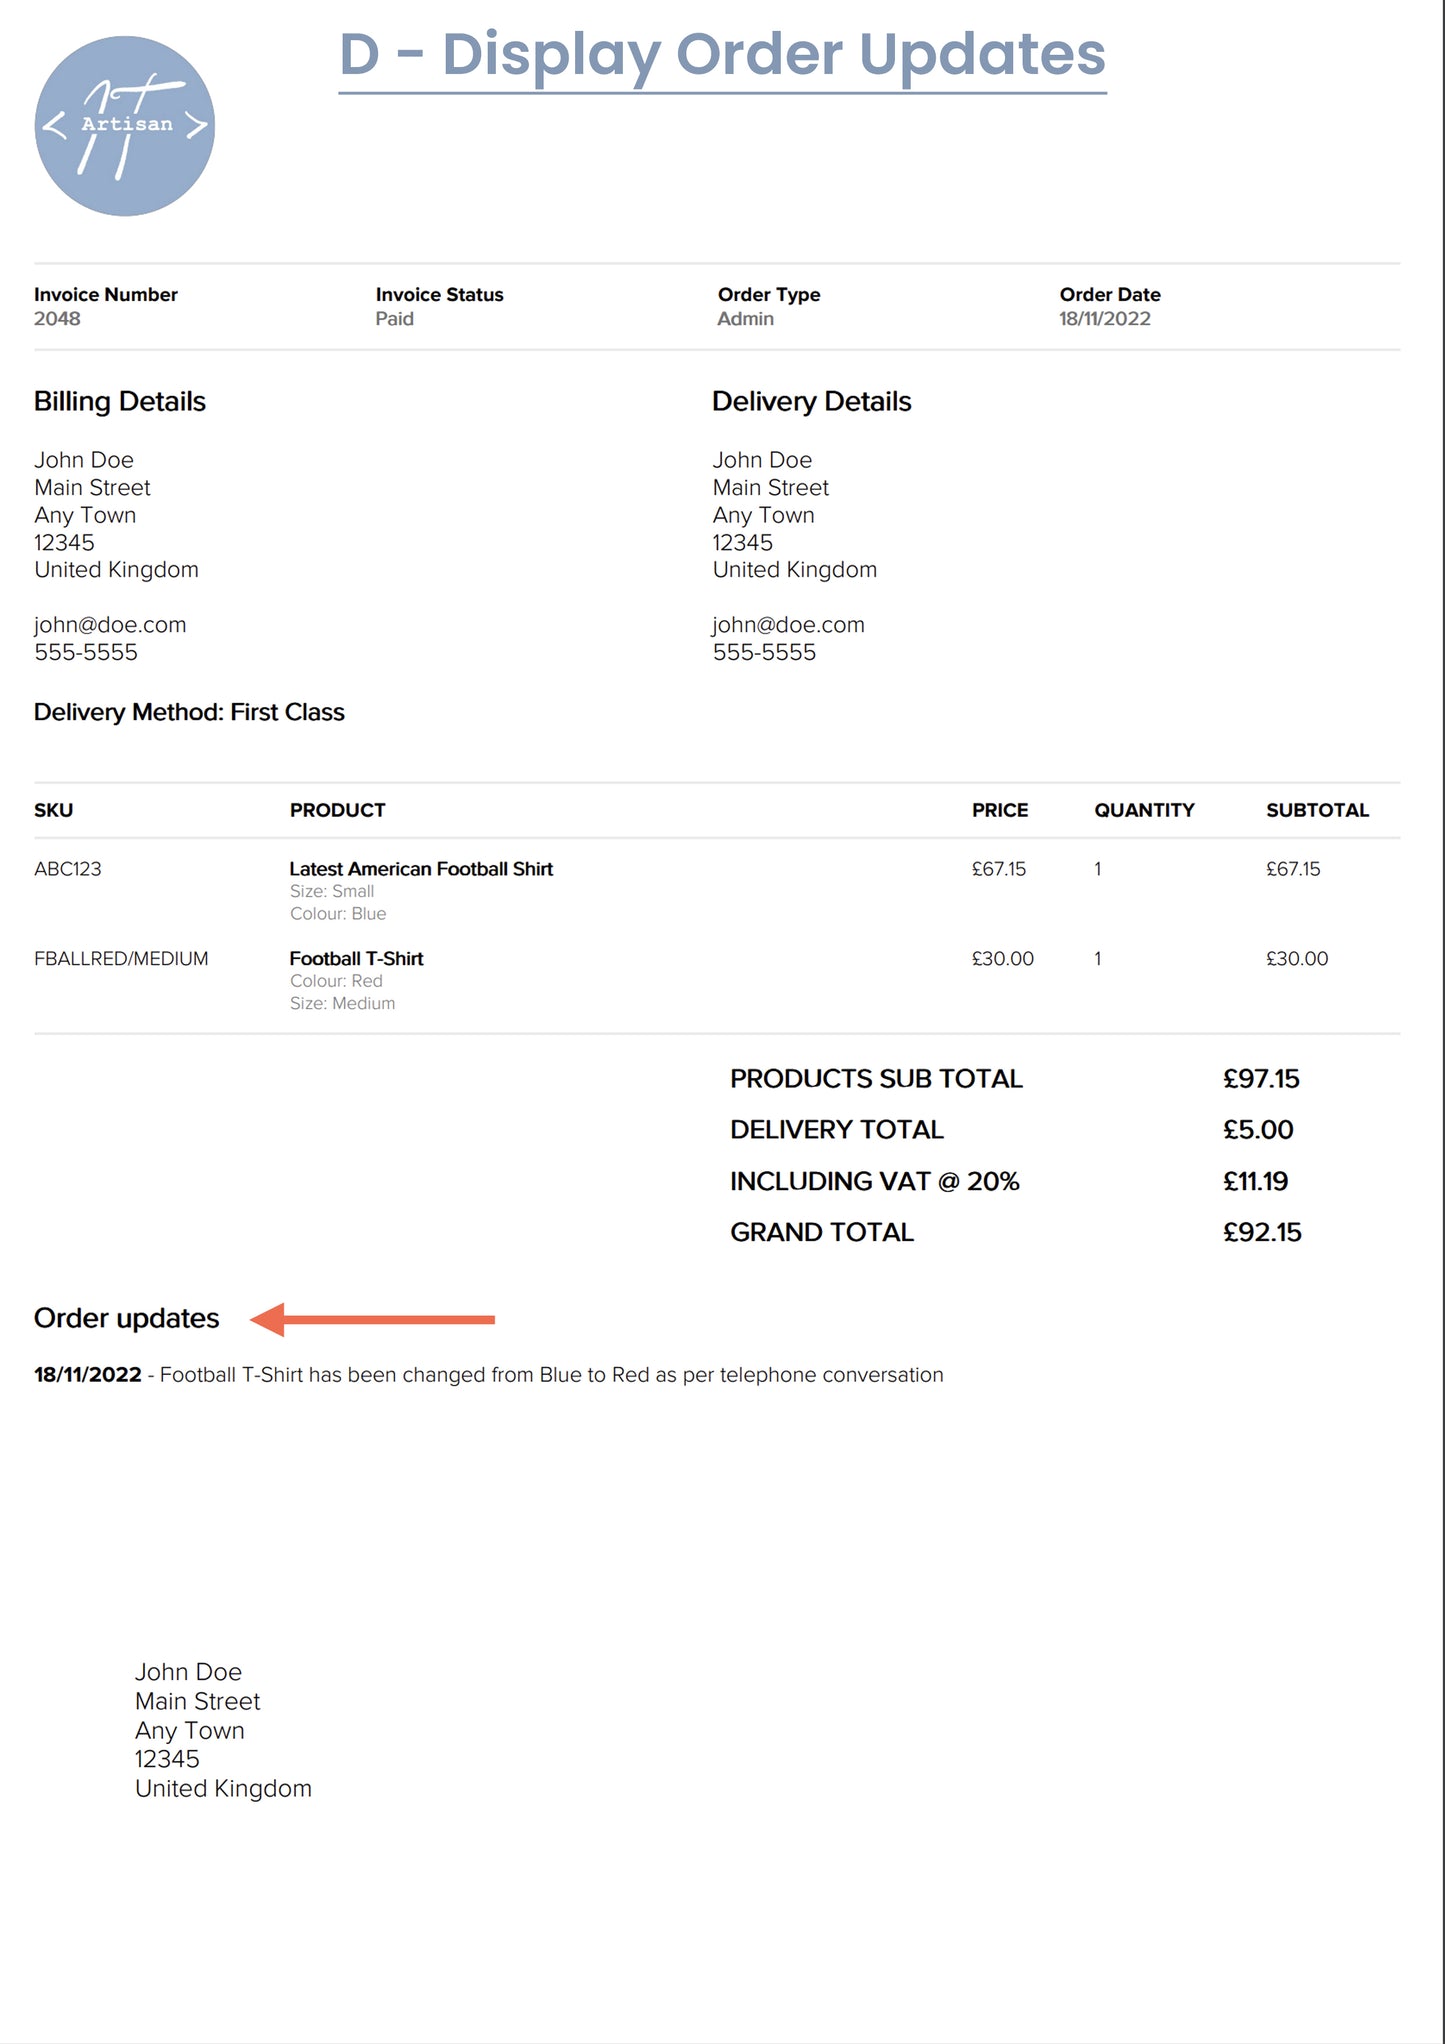 Order updates displayed within the ShopWired order invoice